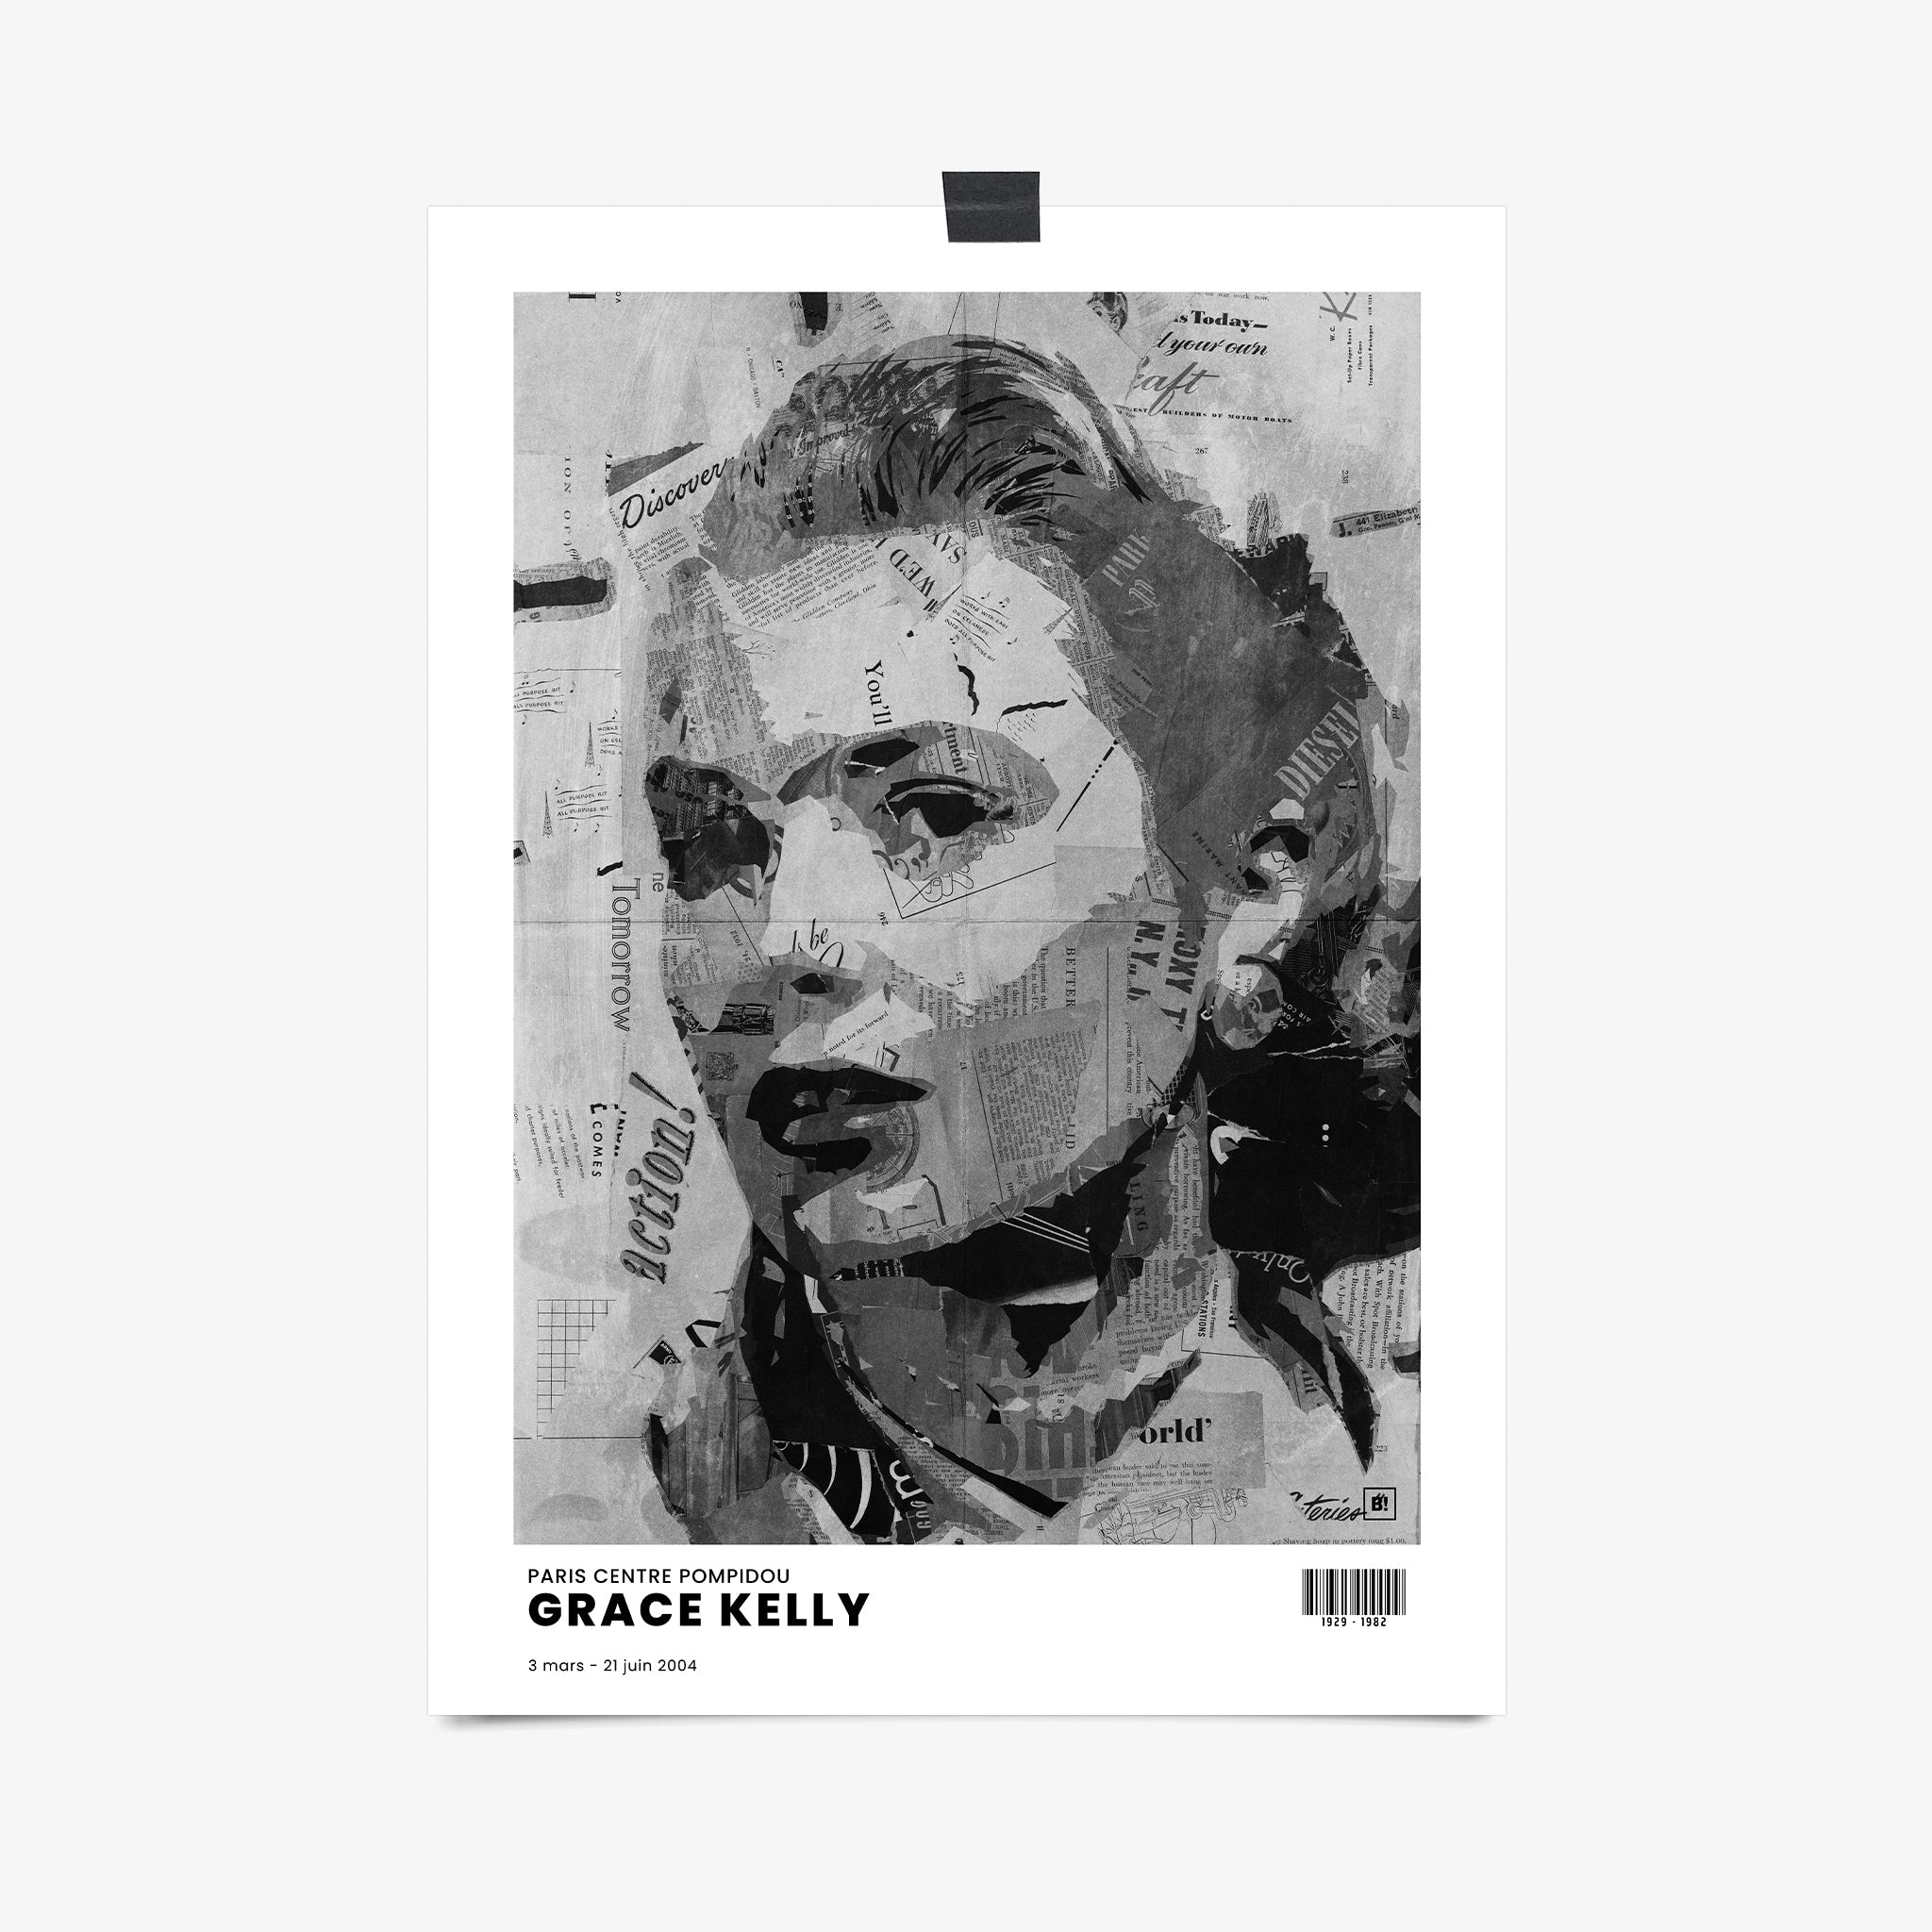 Be inspired by Iconic Grace Kelly Paris Centre Pompidou Exhibition Art Print. This artwork is printed using giclée on archival acid-free paper, capturing its timeless beauty in every detail.